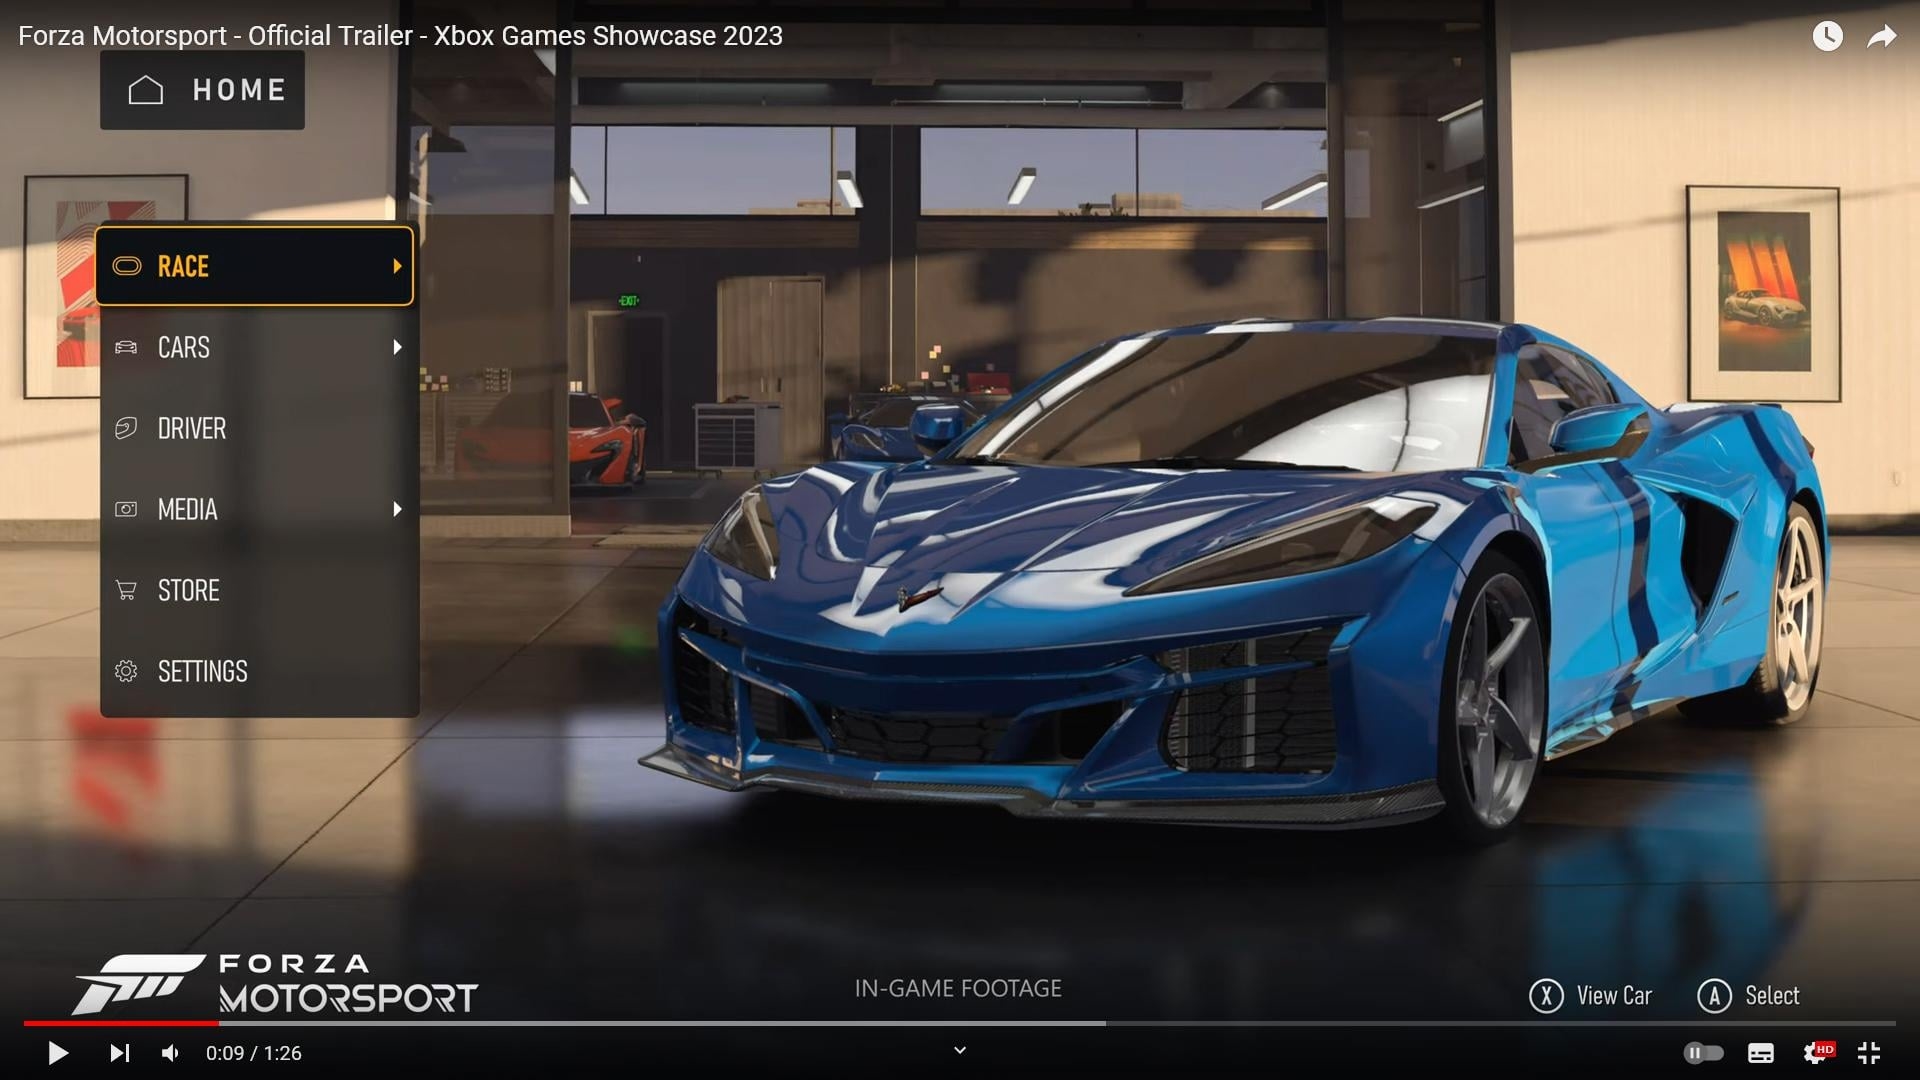 Forza Motorsport on X: We're excited to confirm your #ForzaMotorsport  cover cars - meet the stunning 2023 No. 01 Cadillac Racing V-Series.R and  2024 Chevrolet Corvette E-Ray. Tune in to the Xbox